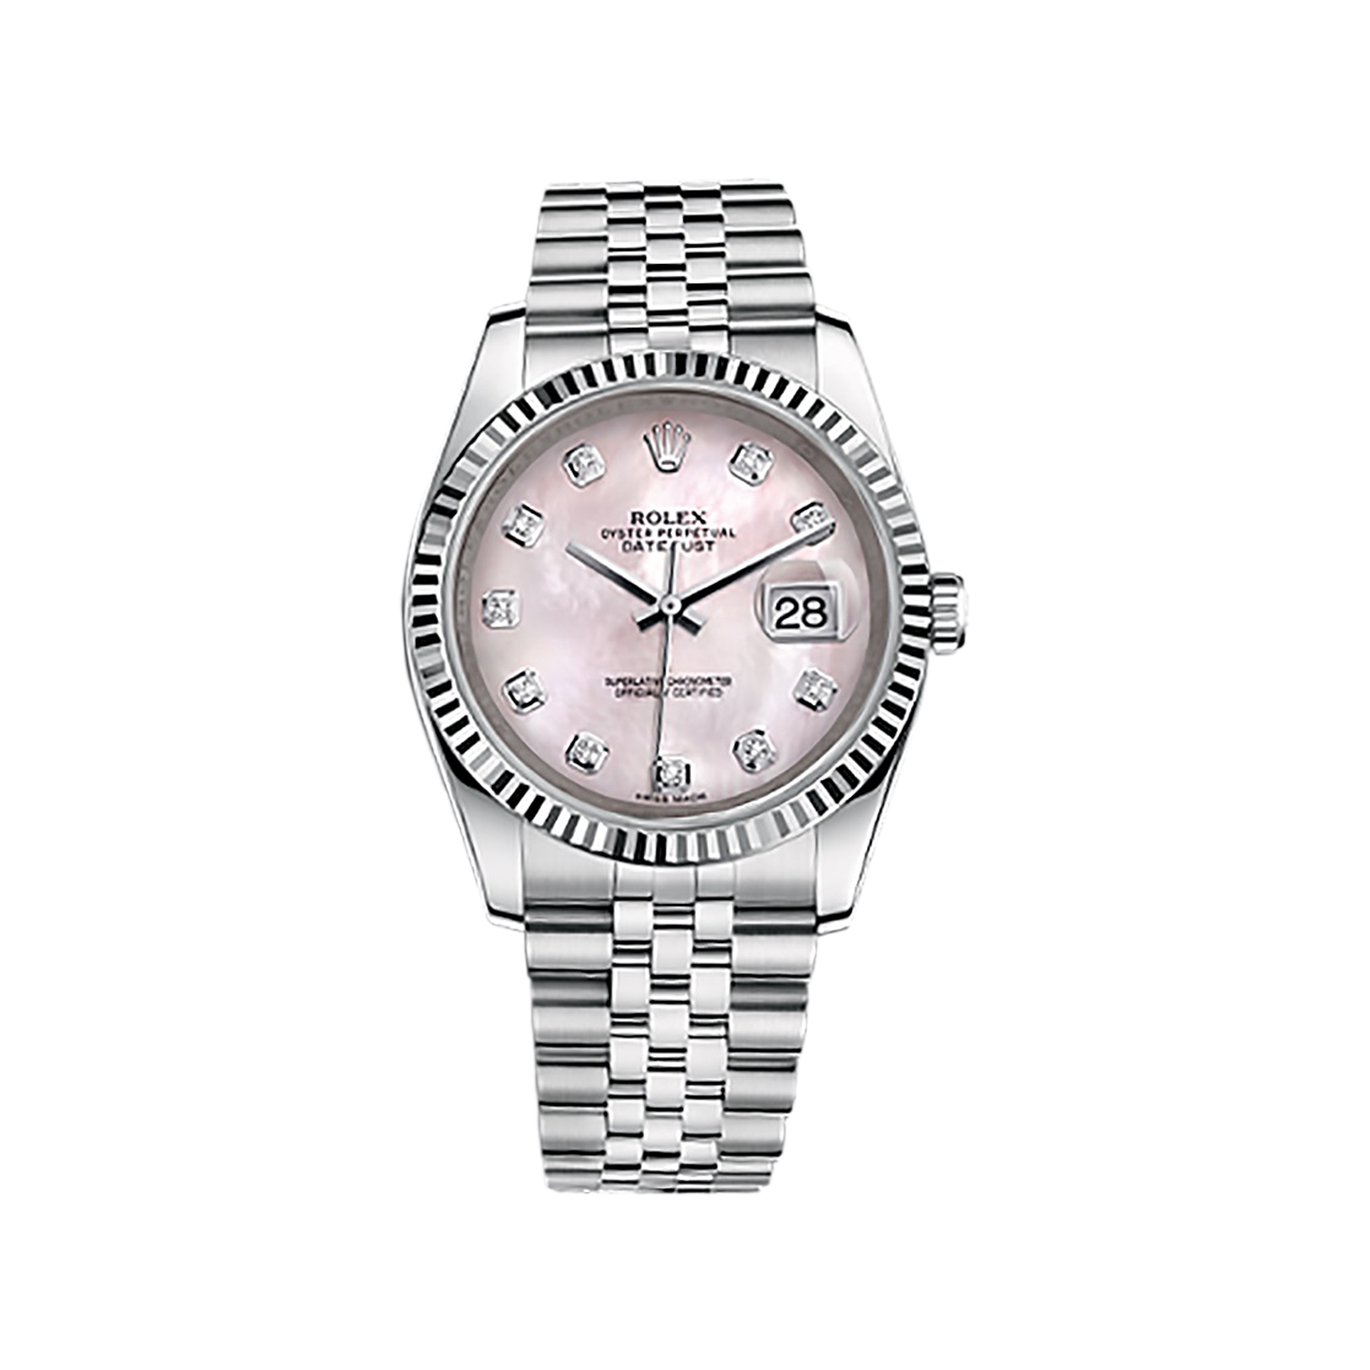 Datejust 36 116234 White Gold & Stainless Steel Watch (Pink Mother-of-Pearl Set with Diamonds)